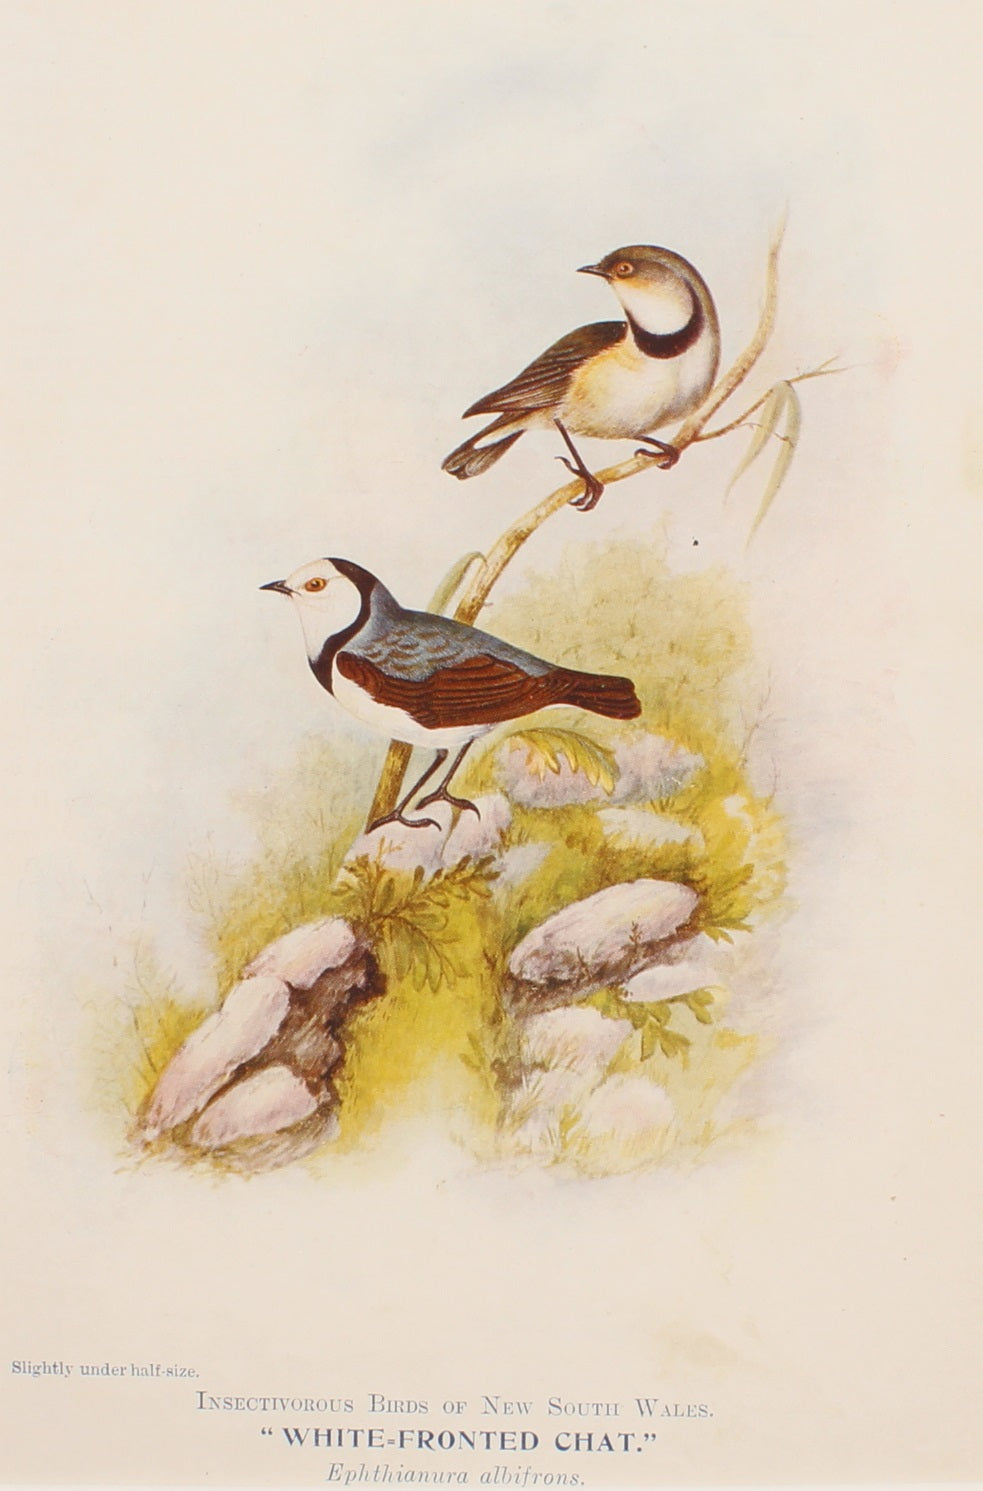 Bird, North Alfred John, White Fronted Chat, Insectivorous Birds of NSW, 1896-7